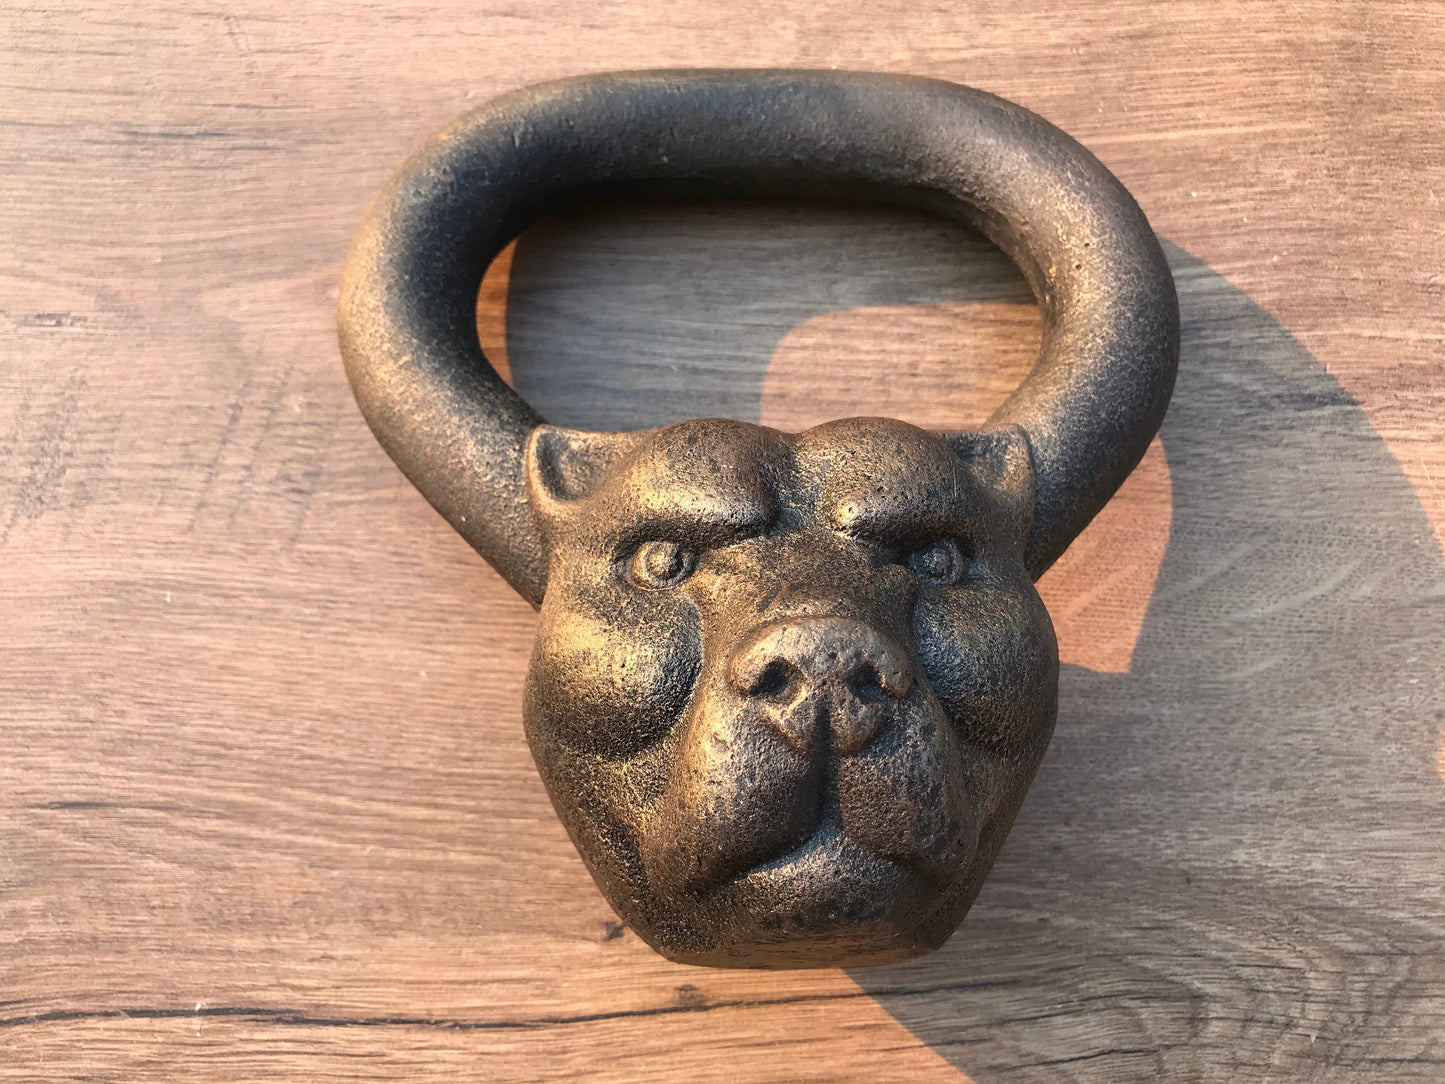 Kettlebell 7.5 kg /16.5 lbs, kettle bell, barbell, iron gifts, dumbbell, iron gift, weight lifting gift, iron anniversary gift, gift for her